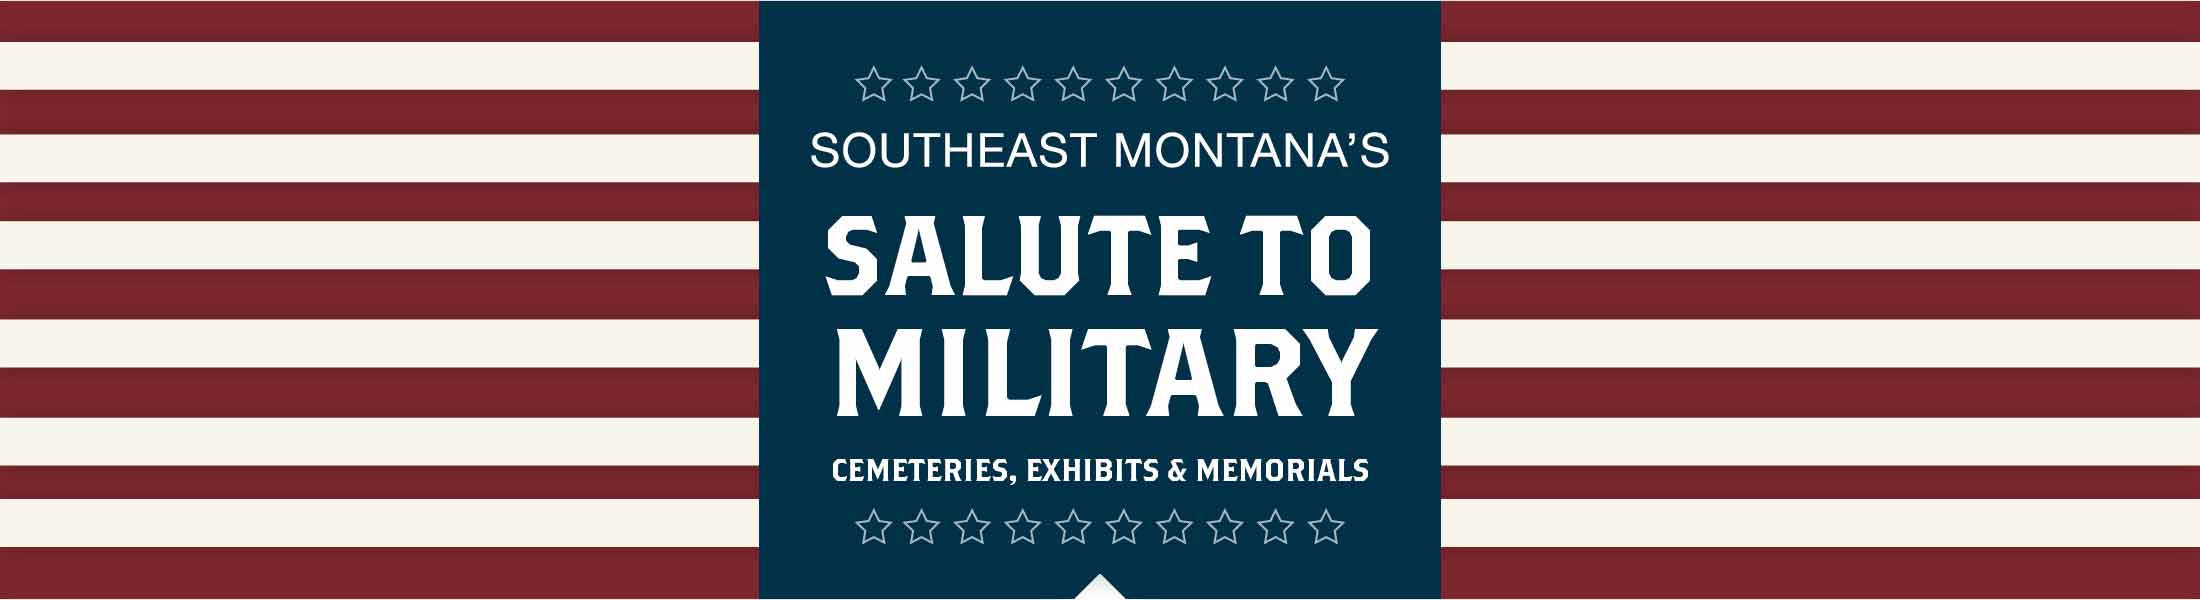 Honoring History in Southeast Montana